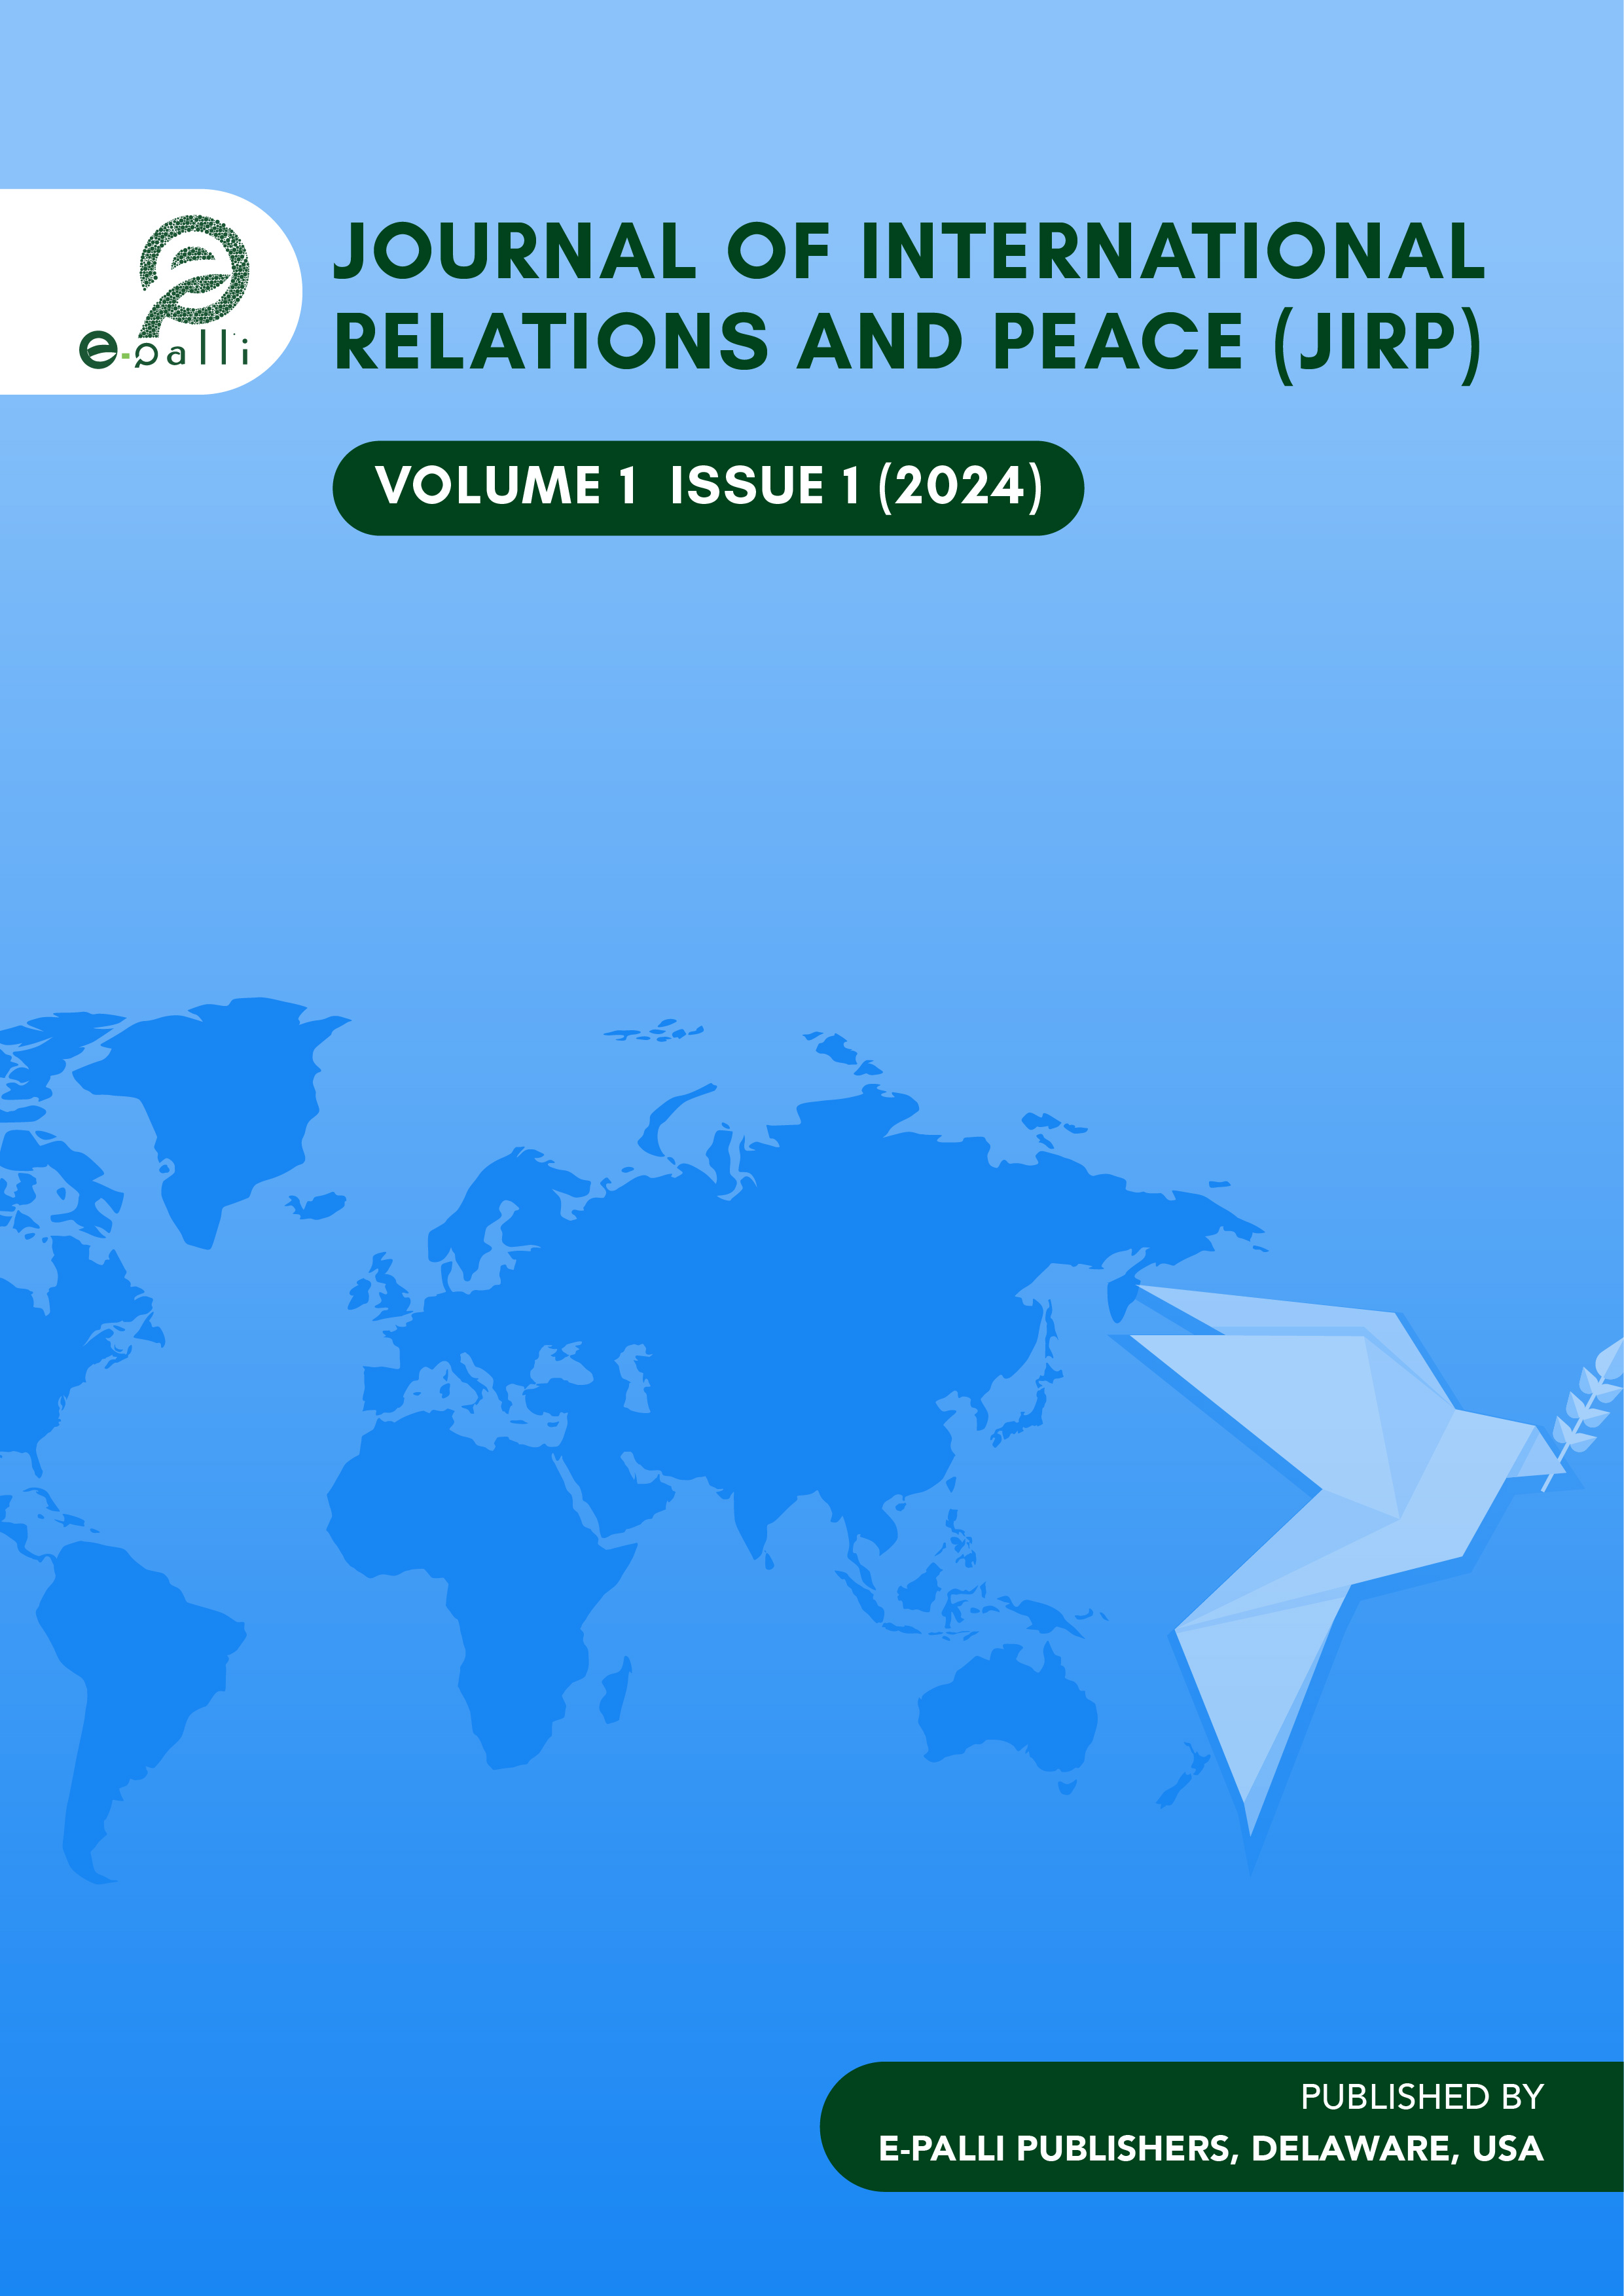                     View Vol. 1 No. 1 (2024): Journal of International Relations and Peace
                